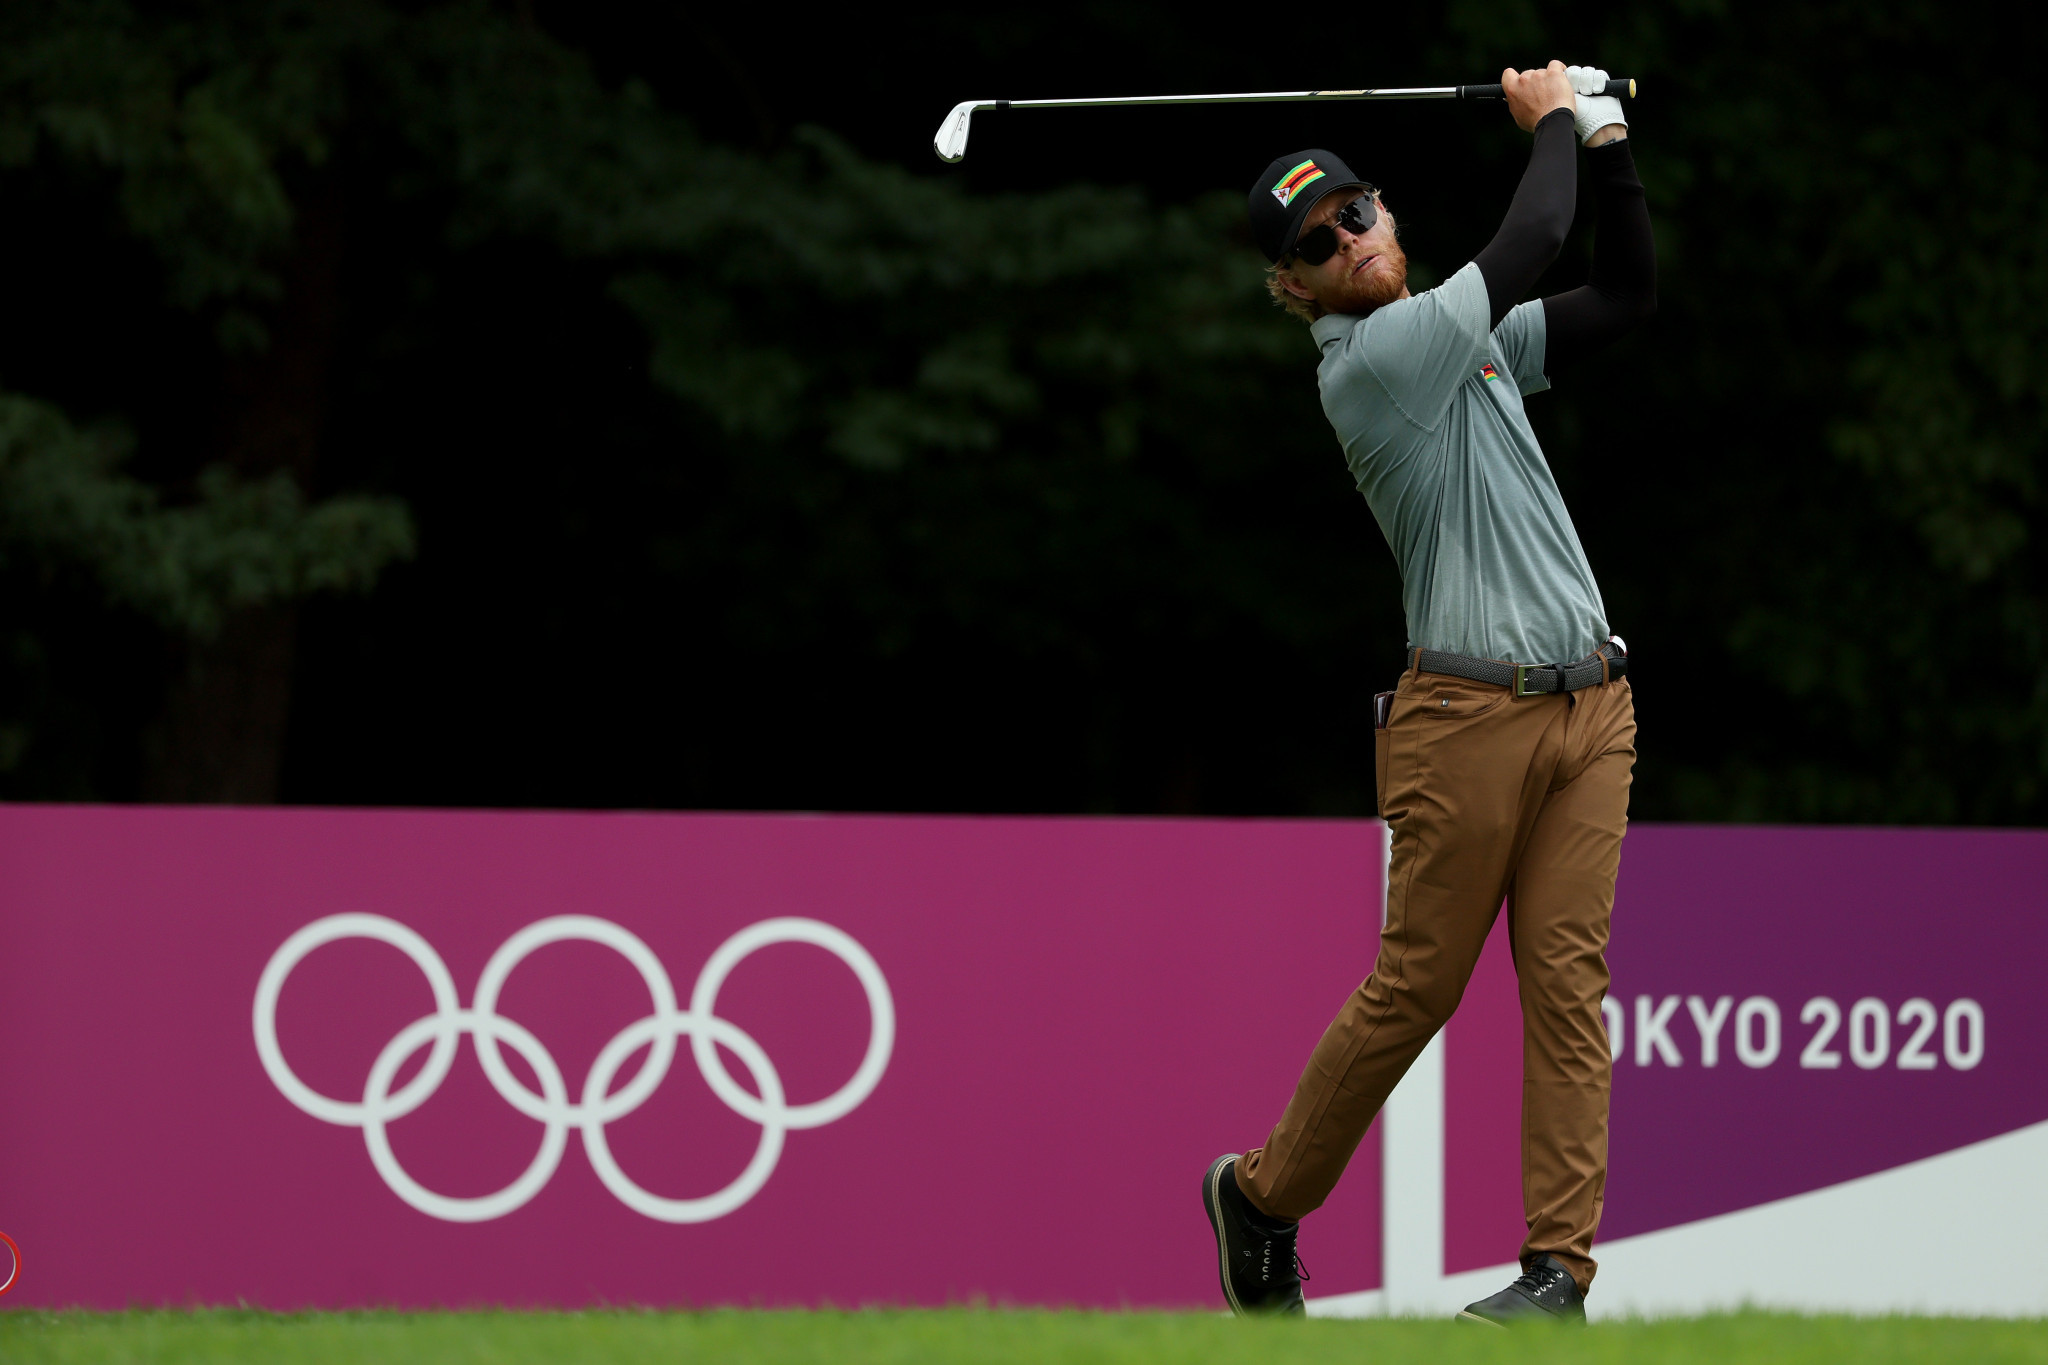 Scott Vincent was Zimbabwe's best performer at Tokyo 2020 when he came equal 16th in the men's golf ©Getty Images